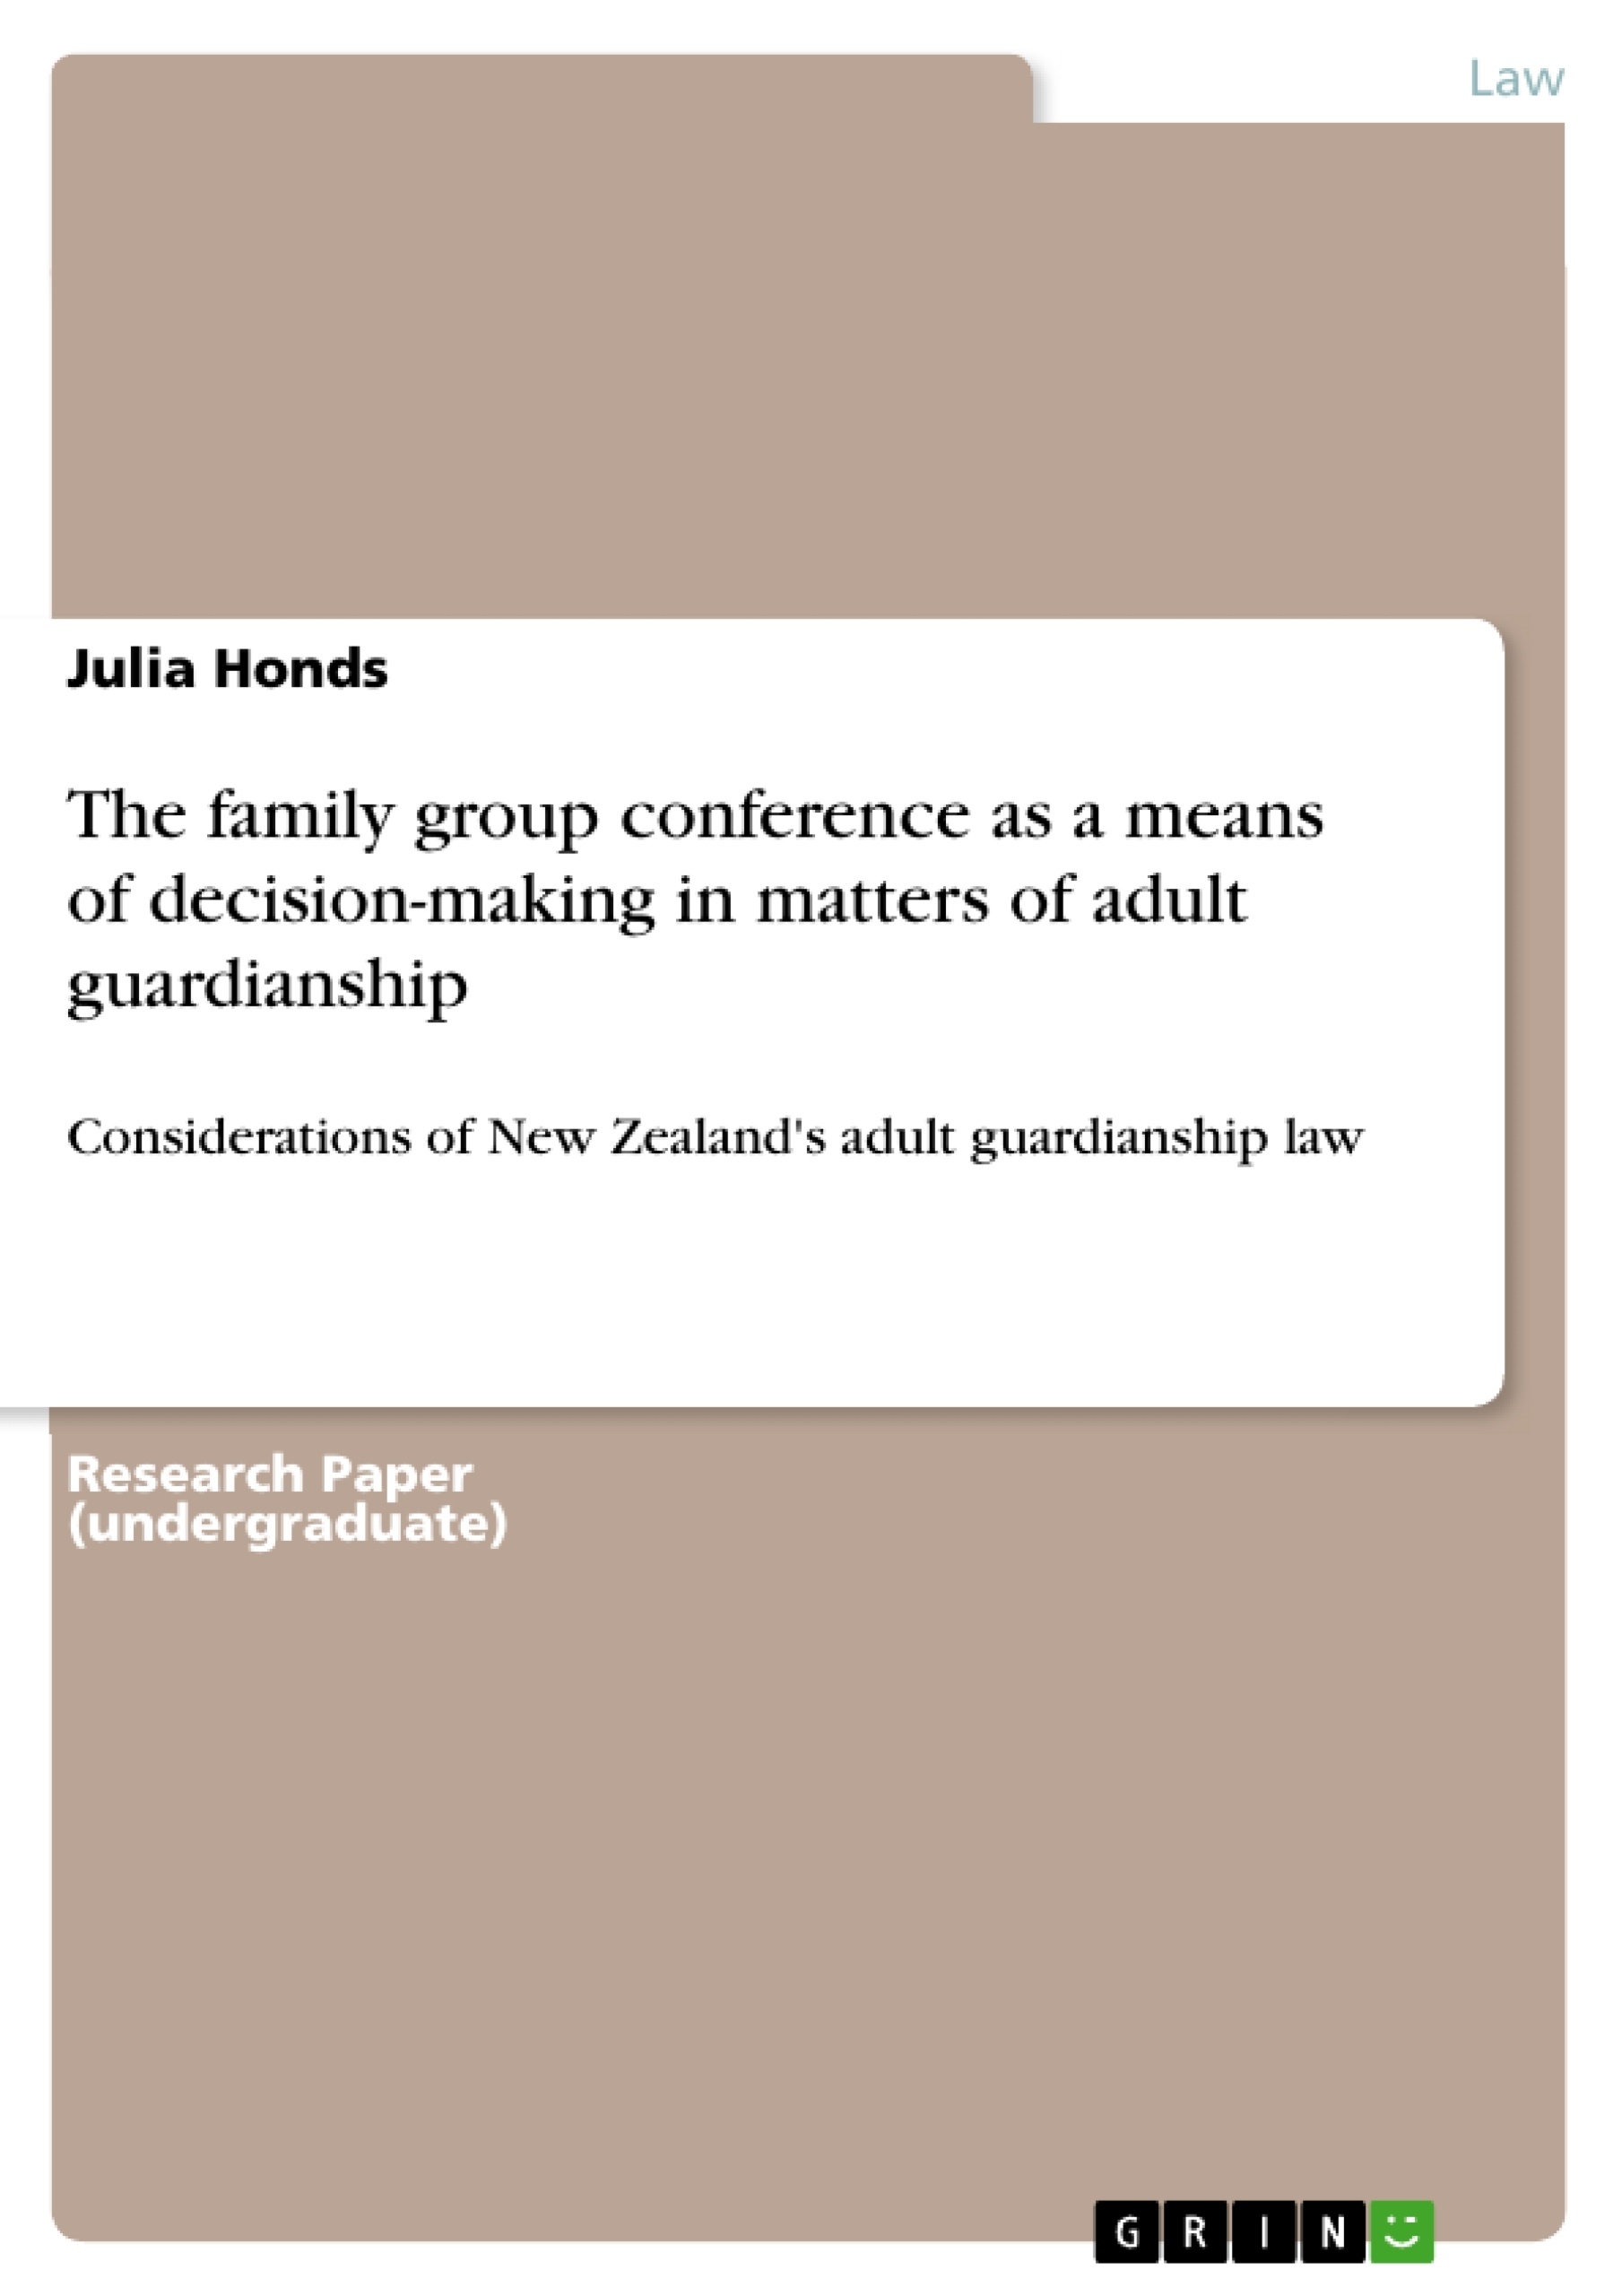 Title: The family group conference as a means of decision-making in matters of adult guardianship